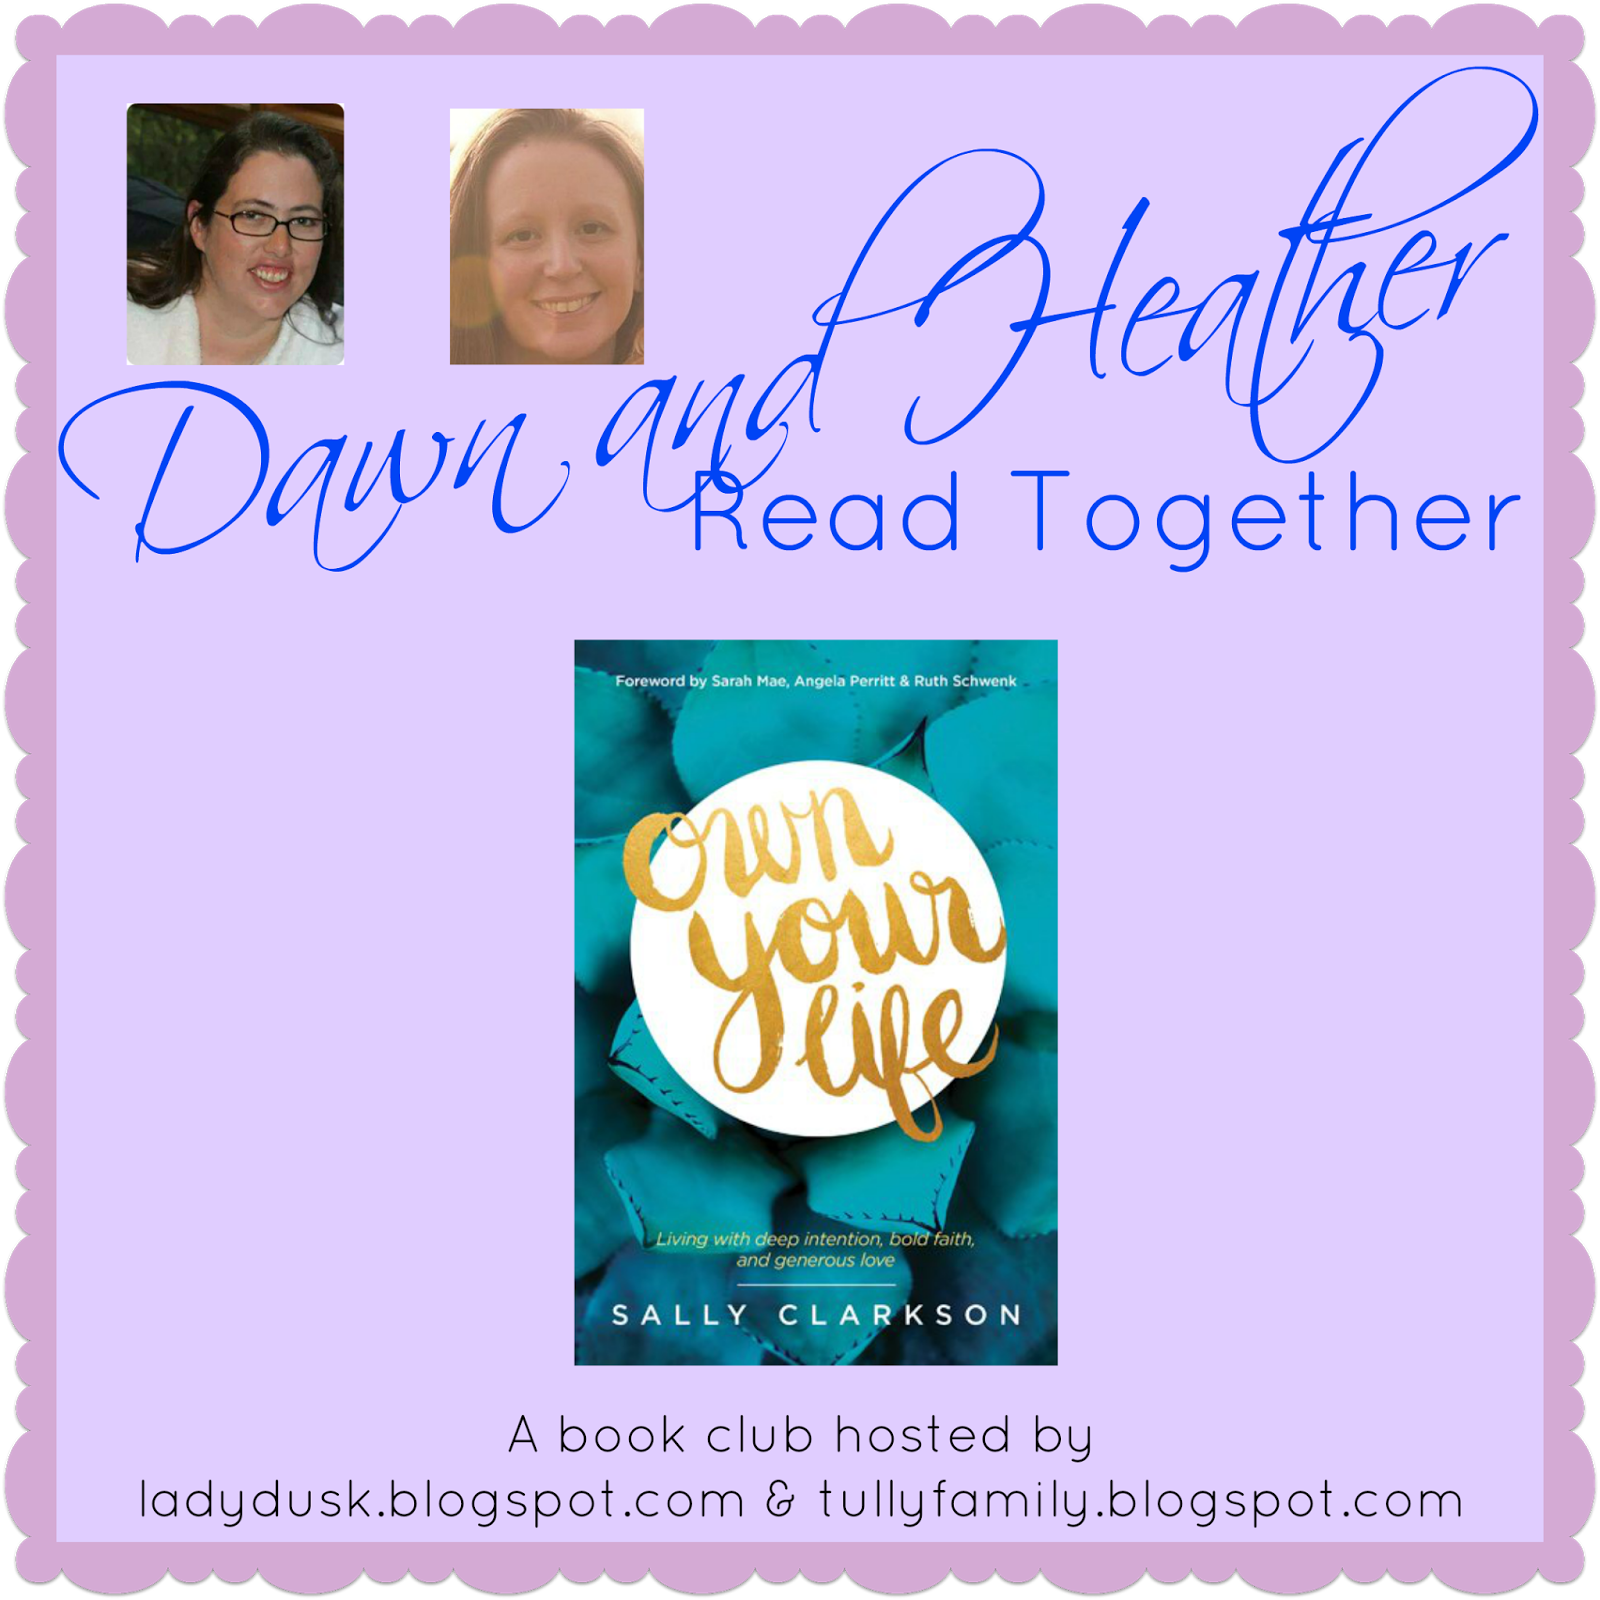 Dawn and Heather Read Together: Own Your Life (Chapter 4)